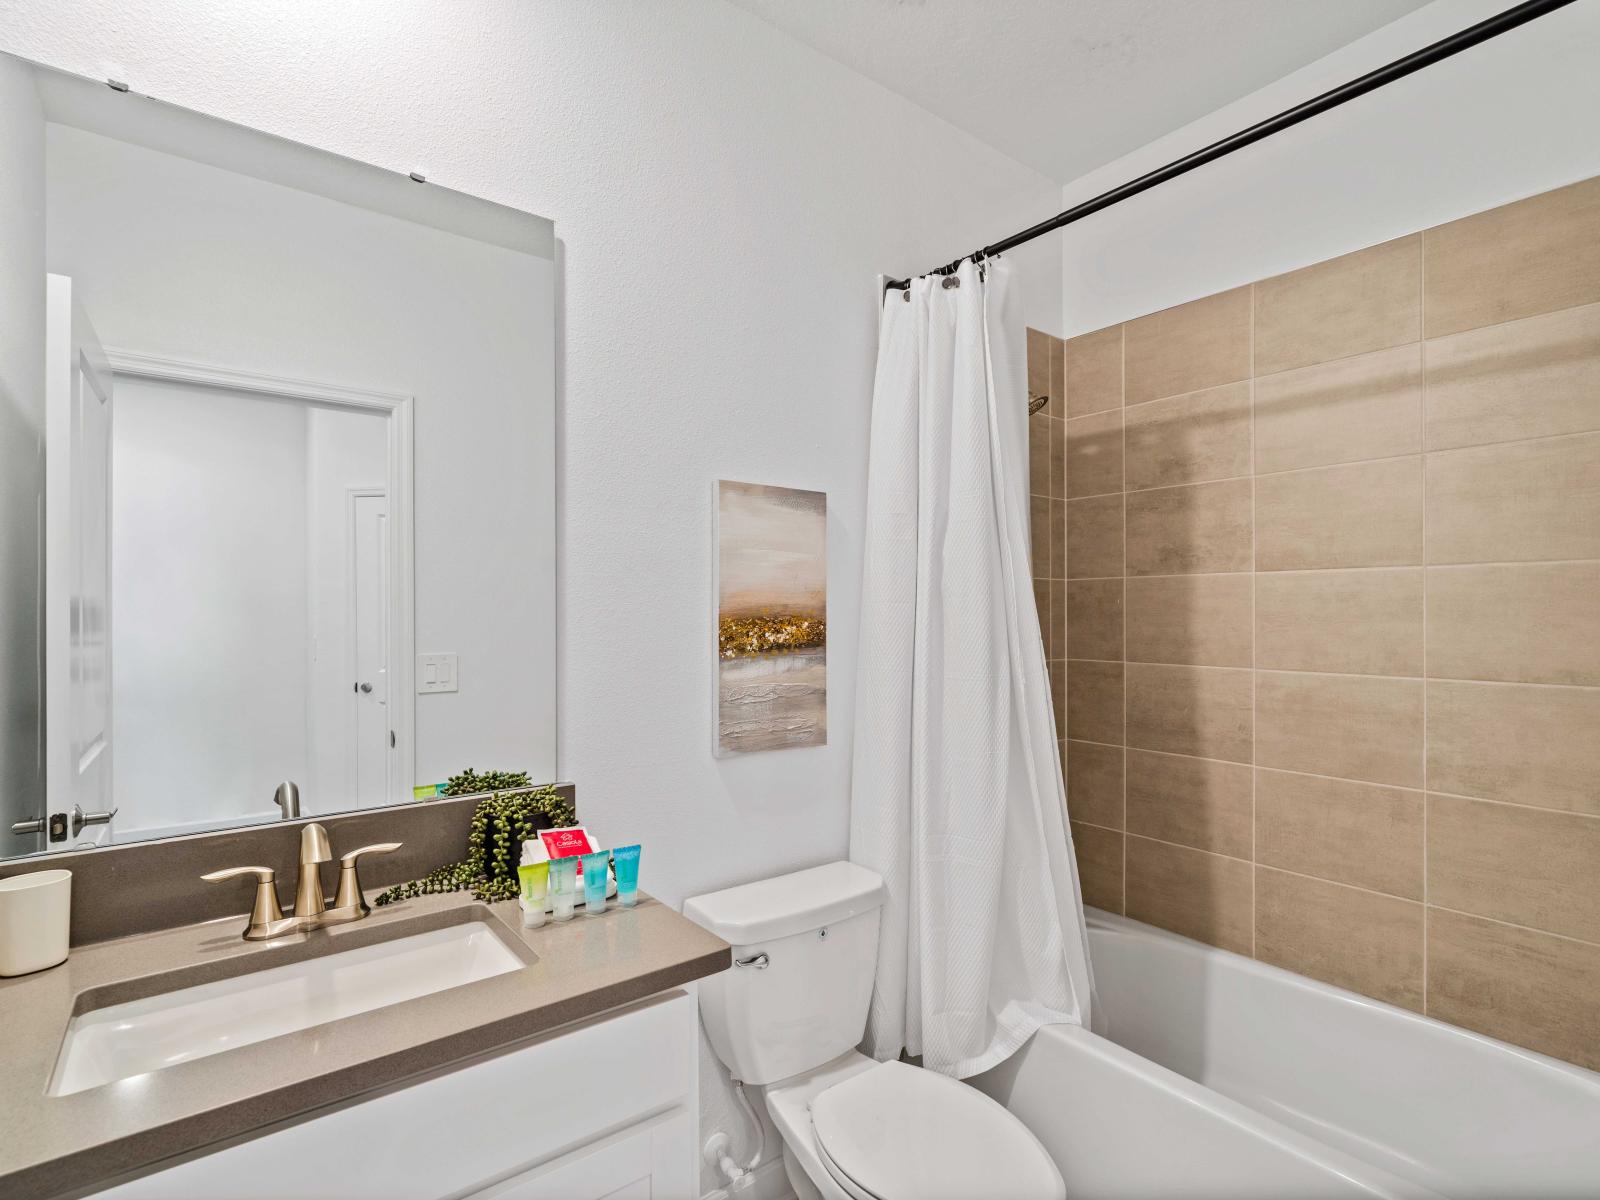 Upscale Bathroom of the Home in Davenport Florida - Chic design featuring a sleek vanity and upscale lighting - Seamless design featuring shower and bathtub combo - Layout offering a sense of luxury and comfort